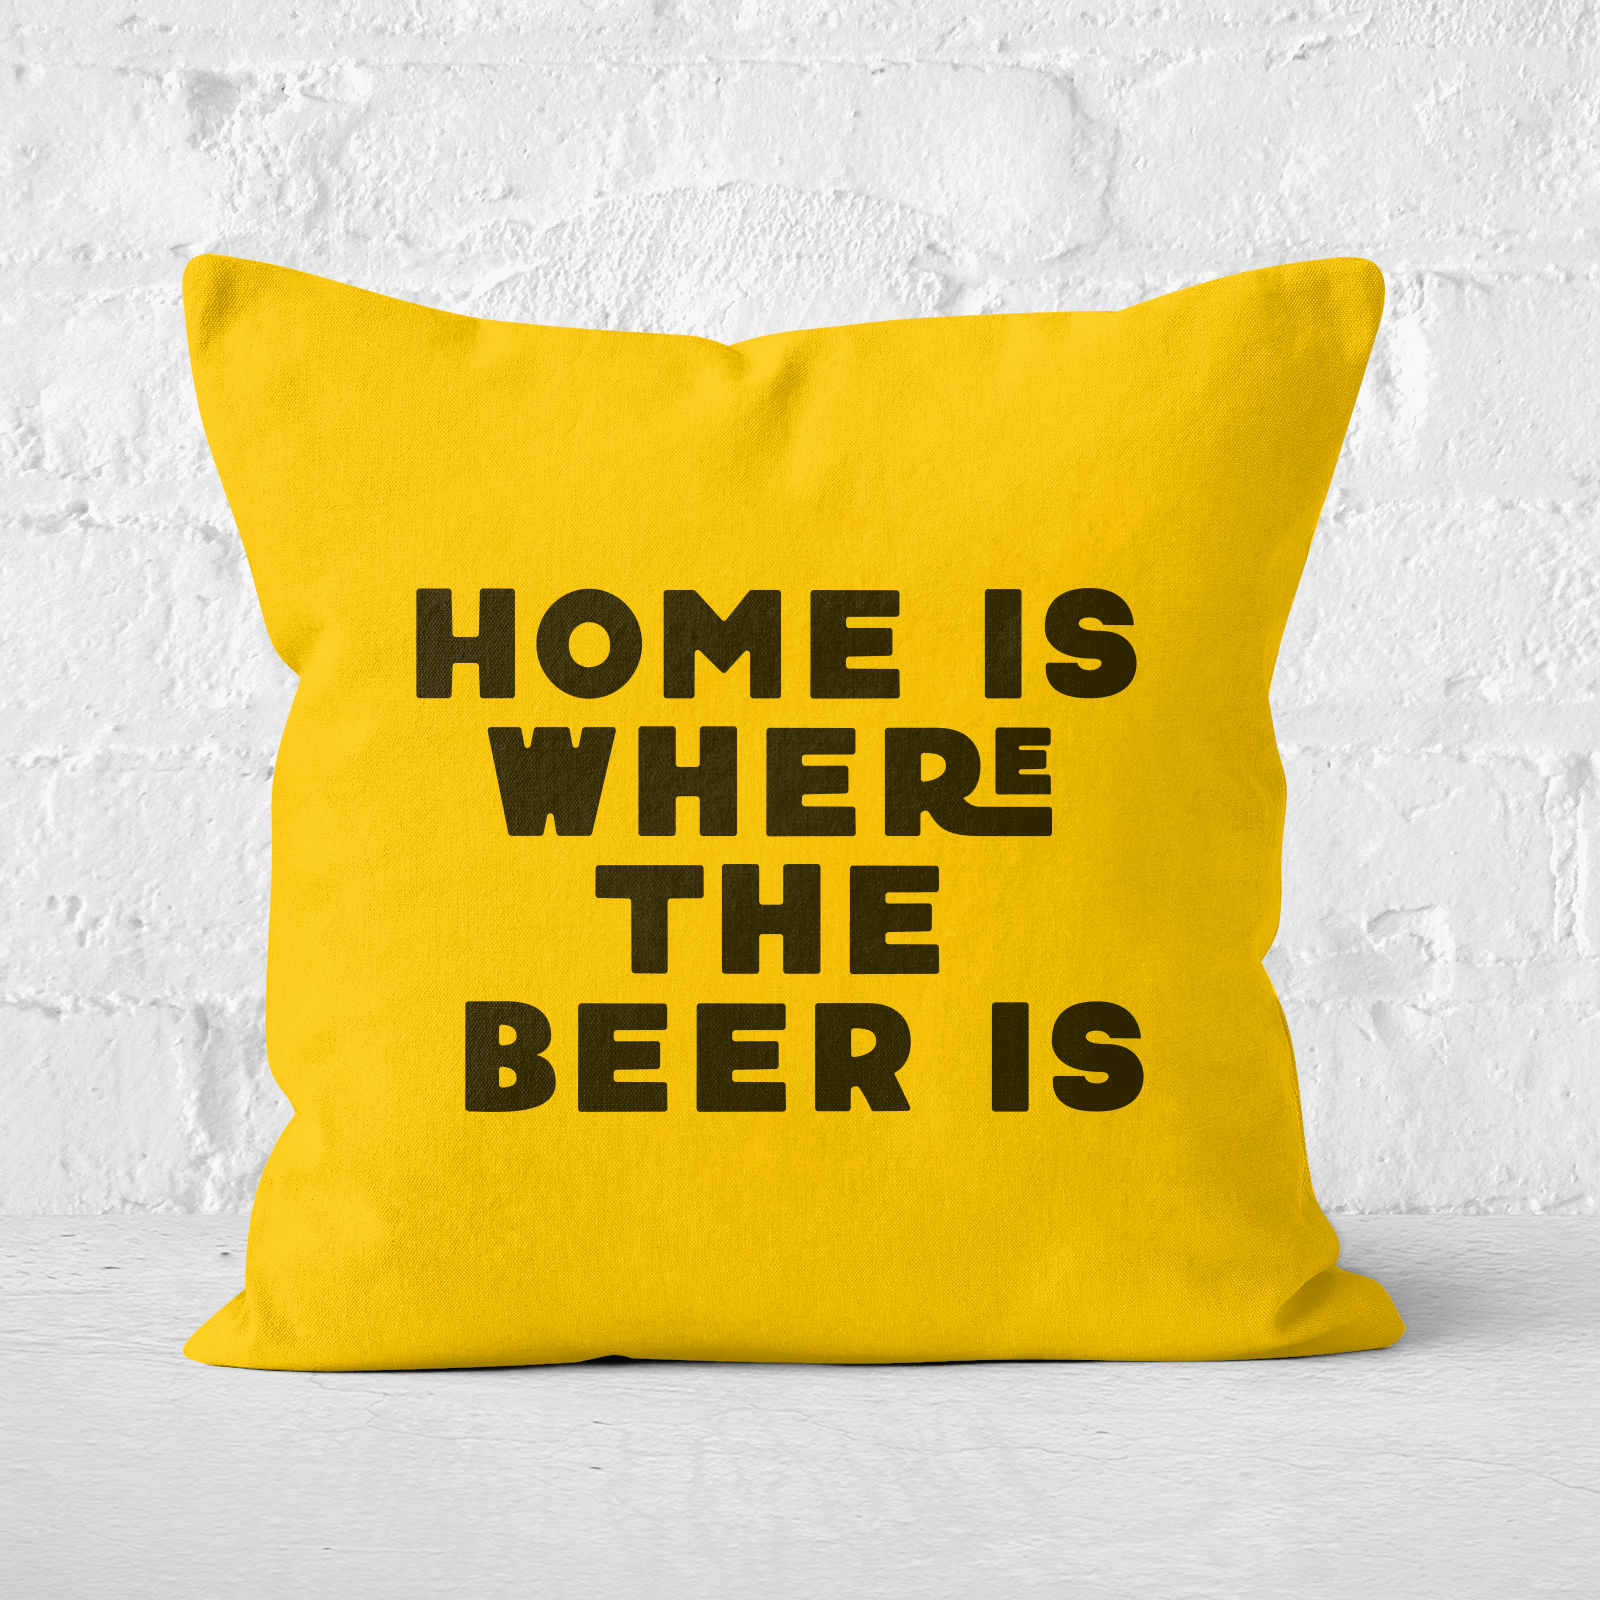 Home Is Where The Beer Is Square Cushion - 60x60cm - Soft Touch